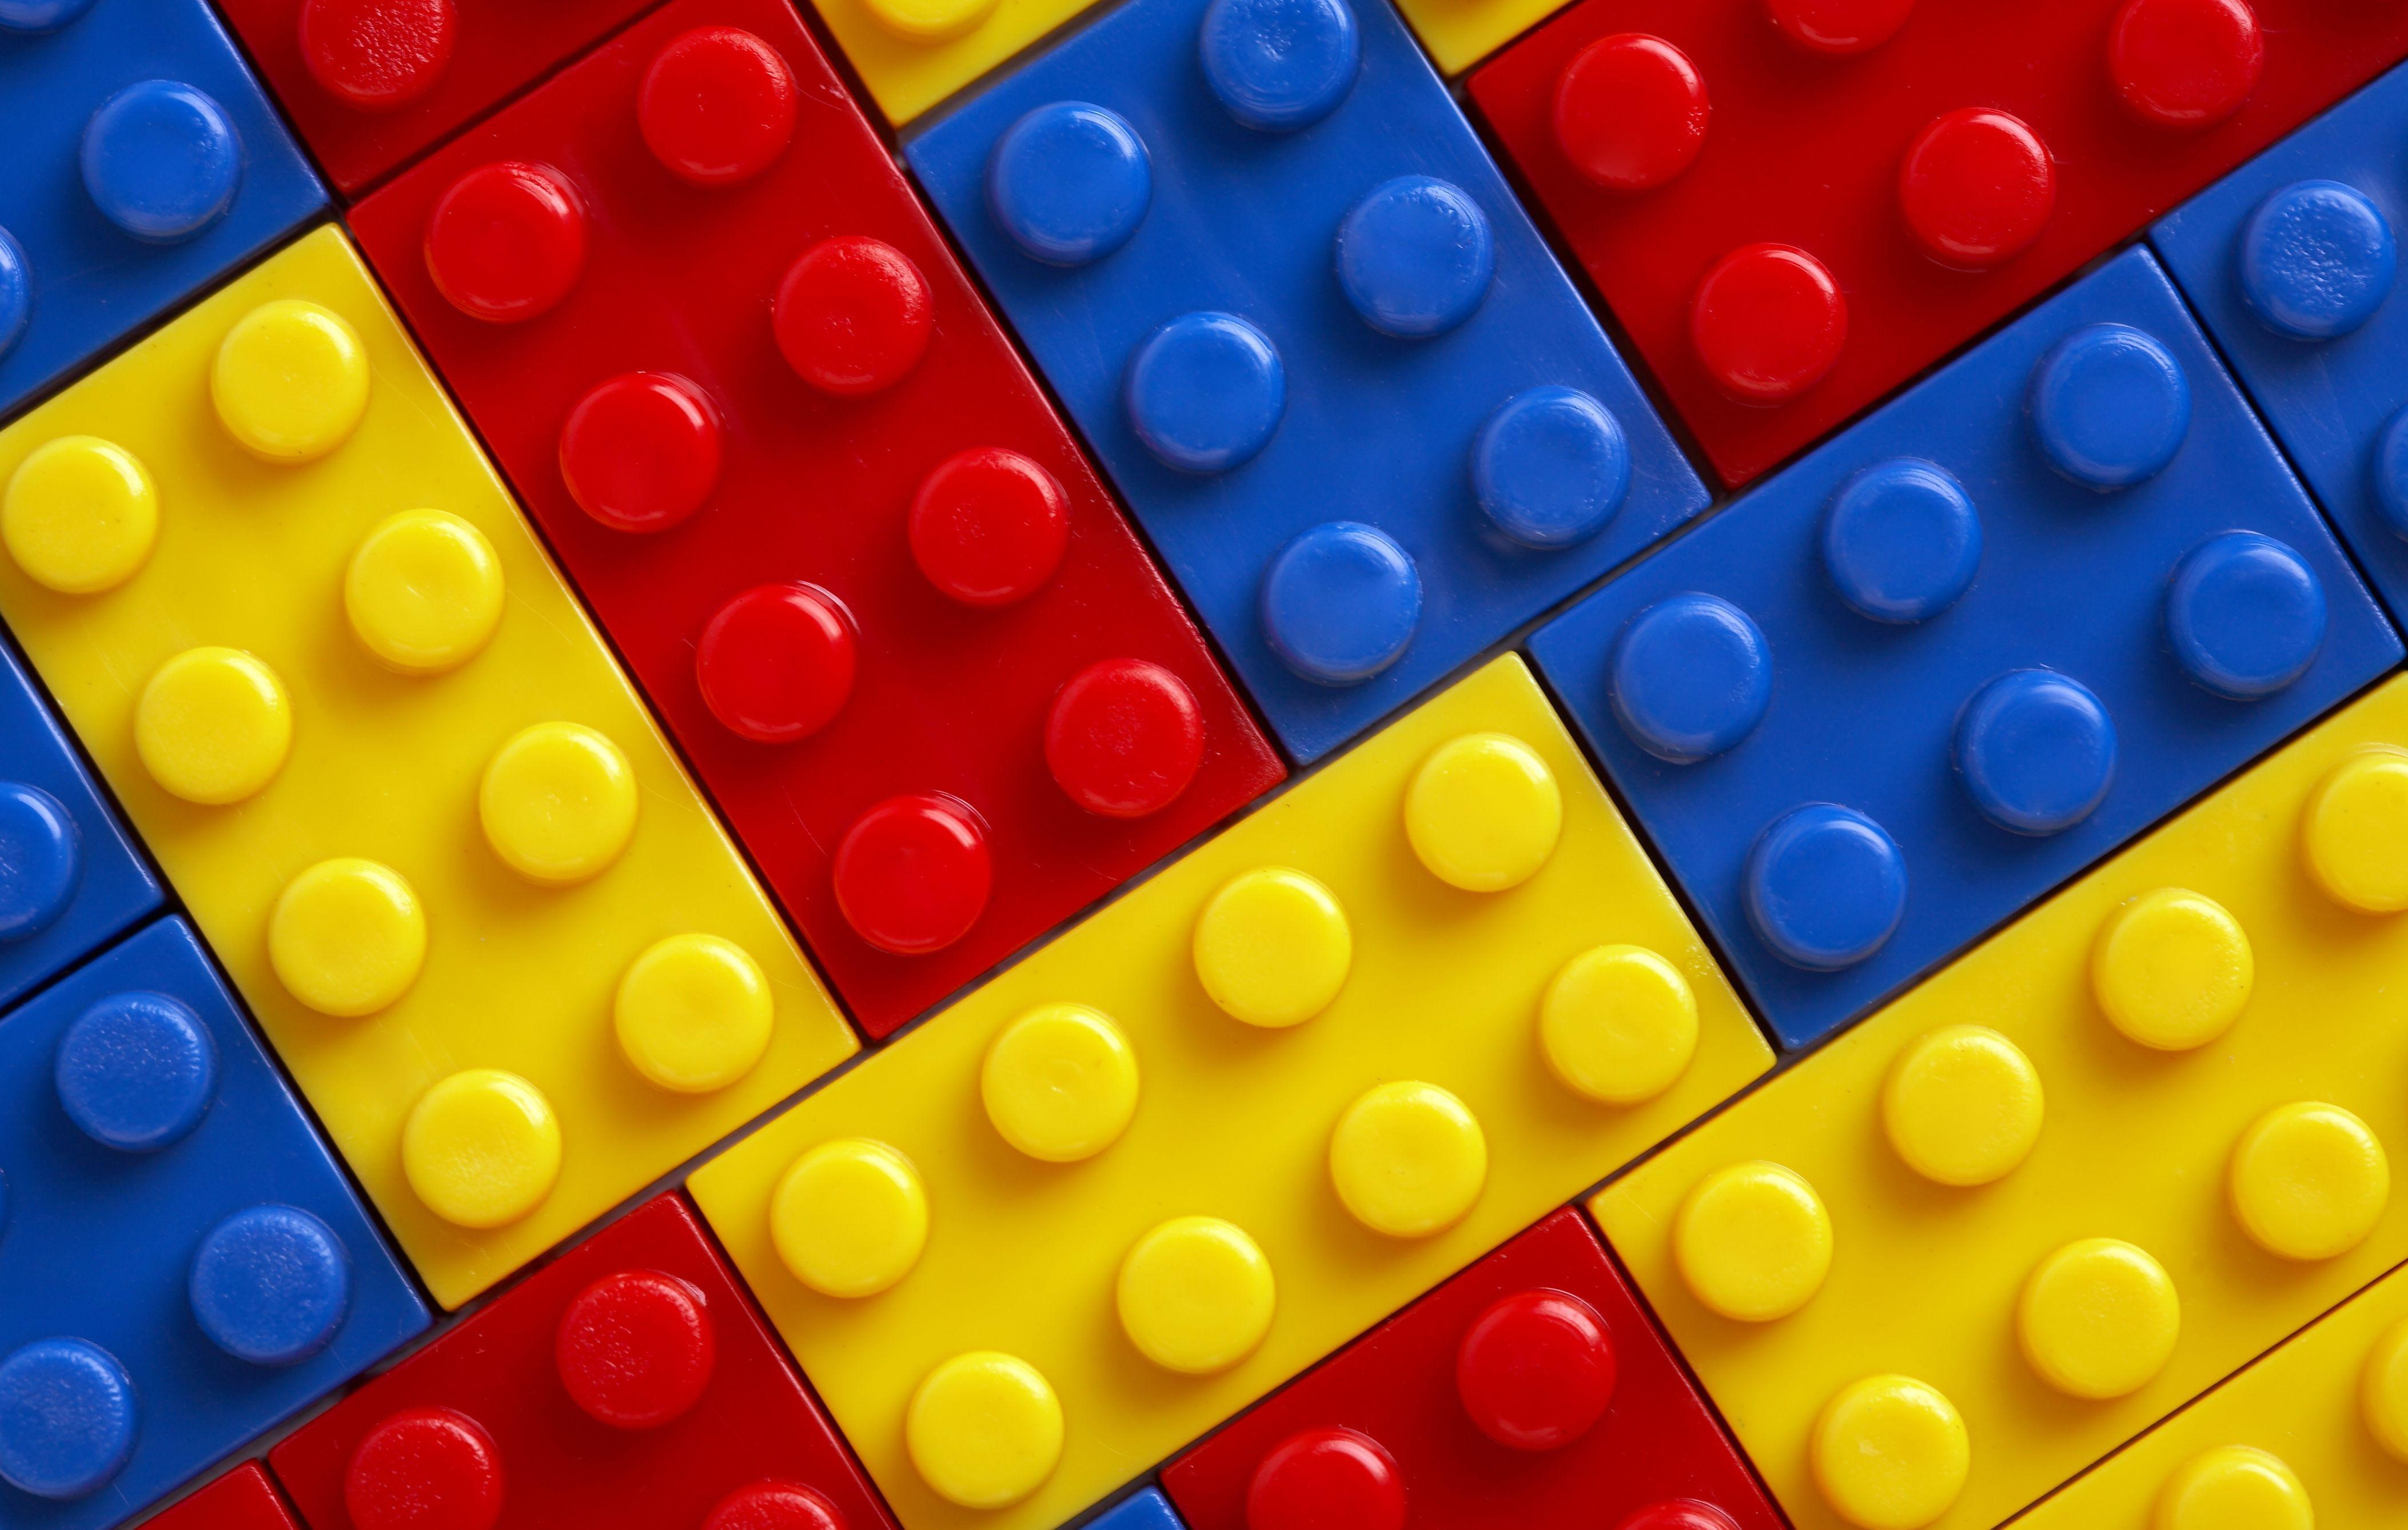 LEGO Background Wallpaper, 46 Widescreen HD Quality Wallpaper of LEGO